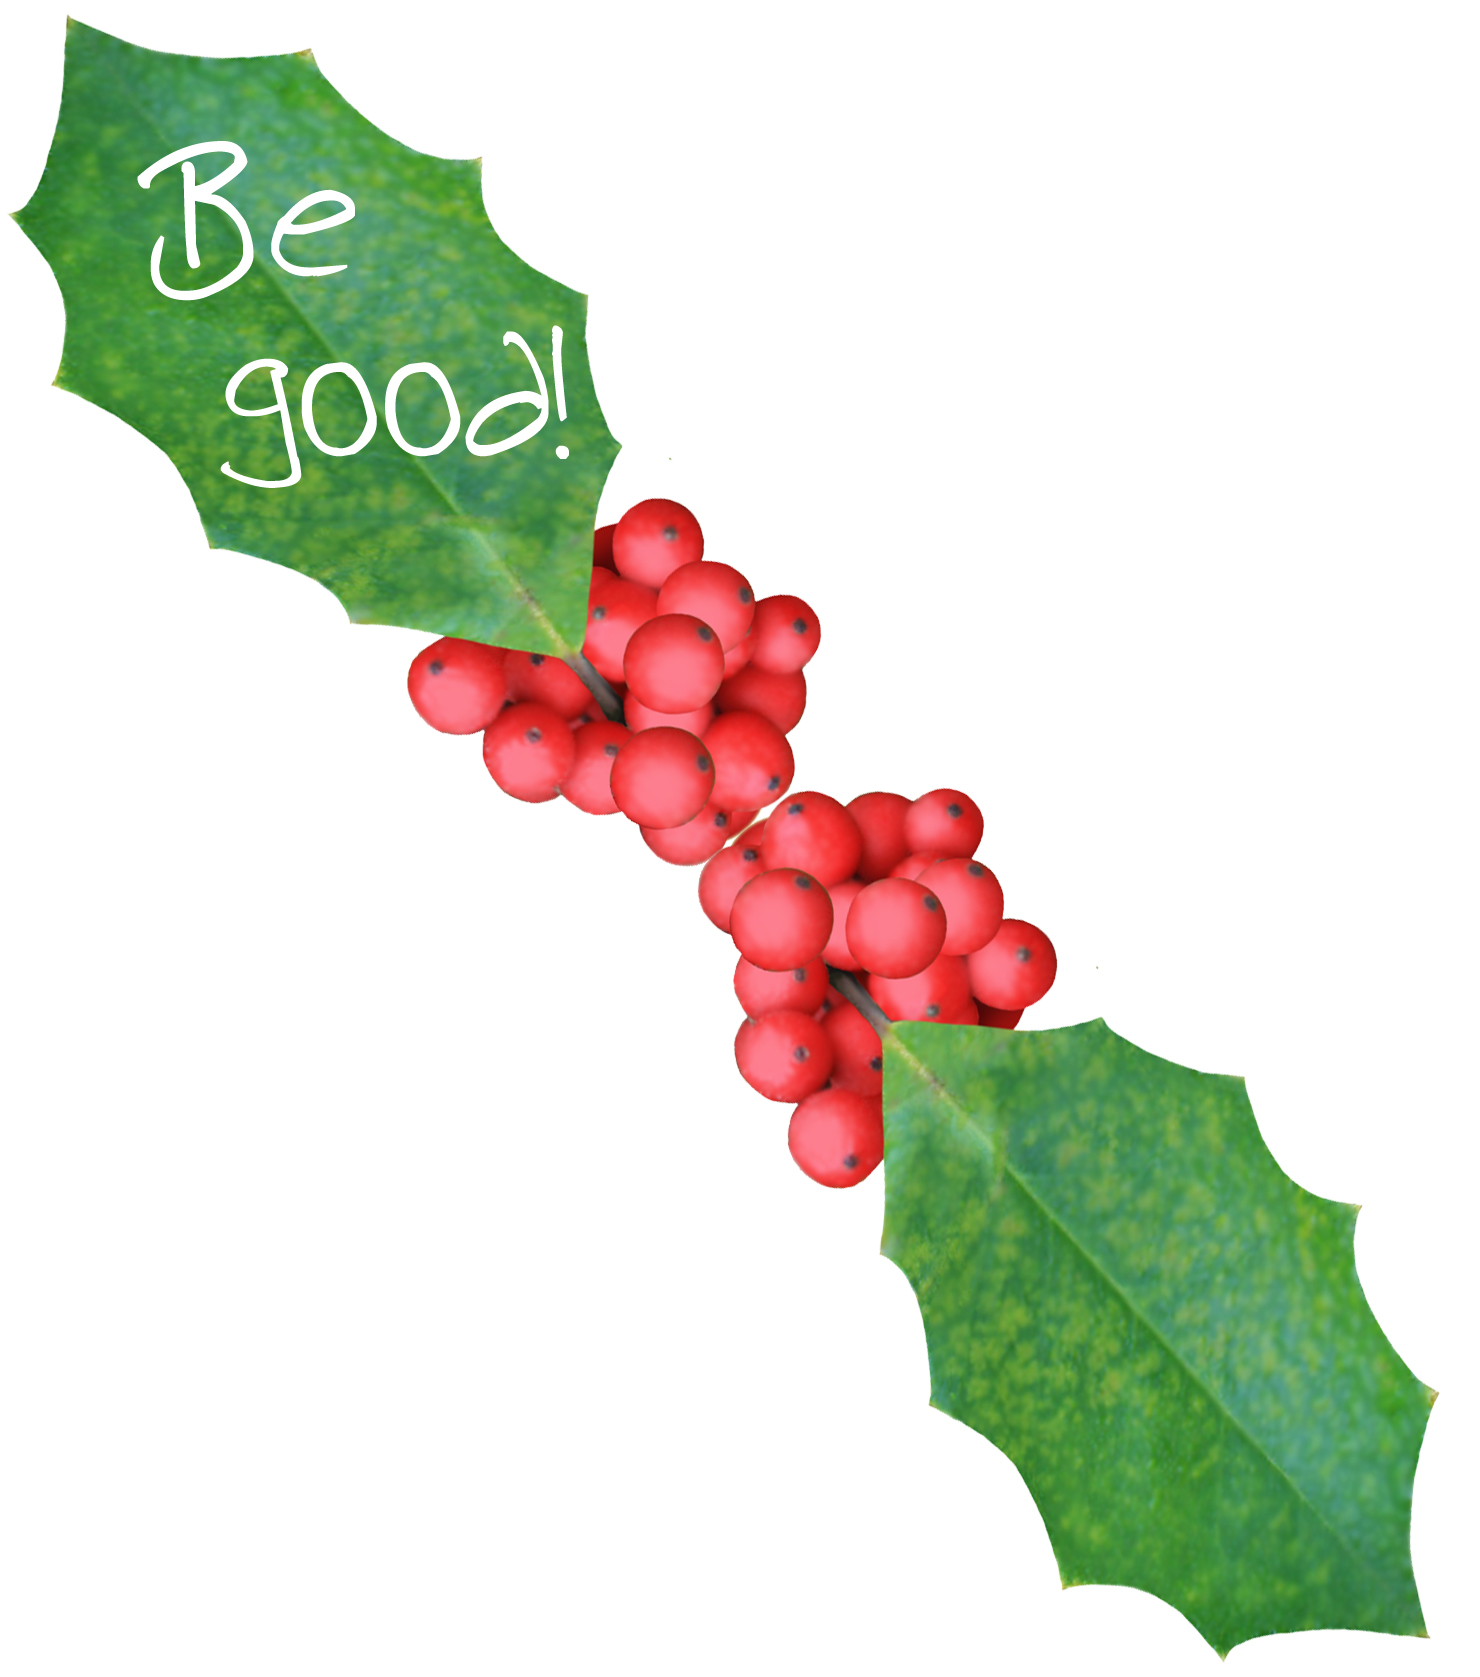 An elf message written on a leaf saying "Be good!"